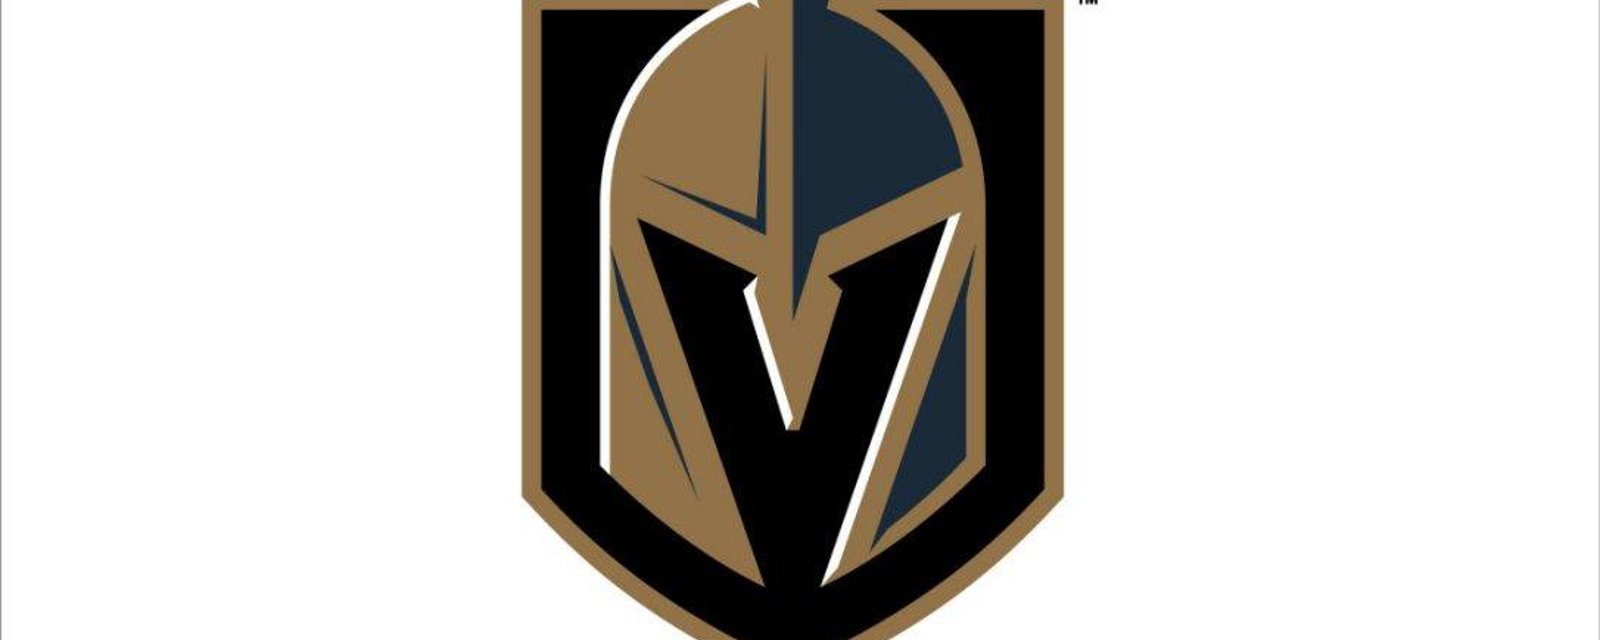 NHL's use of “Golden Knights” reportedly under review by the U.S. Army.